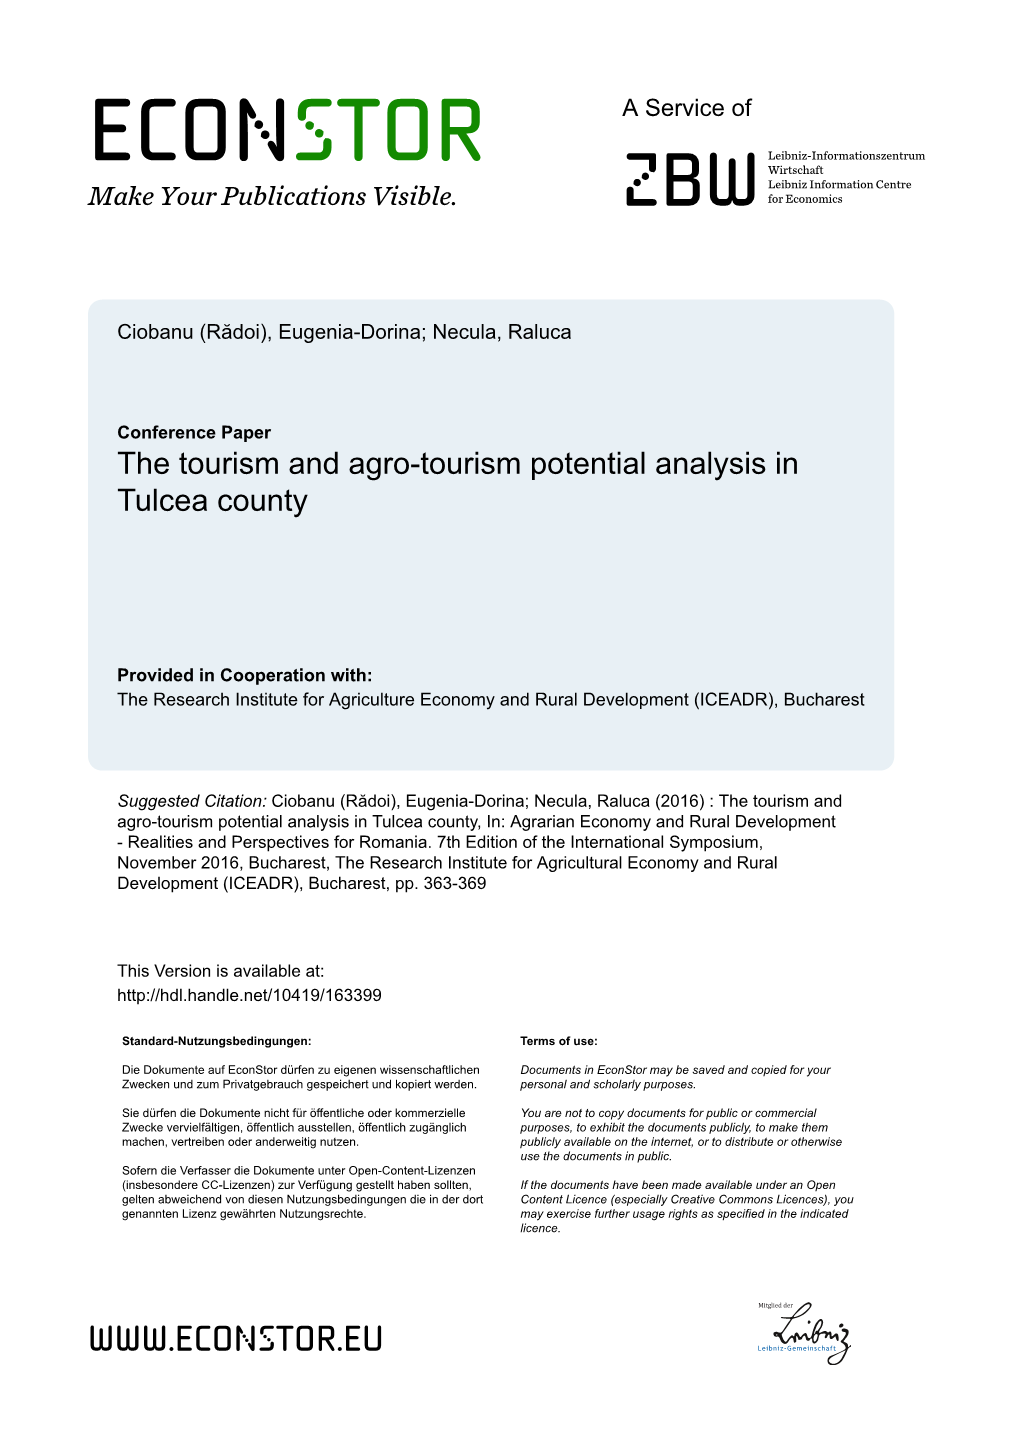 The Tourism and Agro-Tourism Potential Analysis in Tulcea County